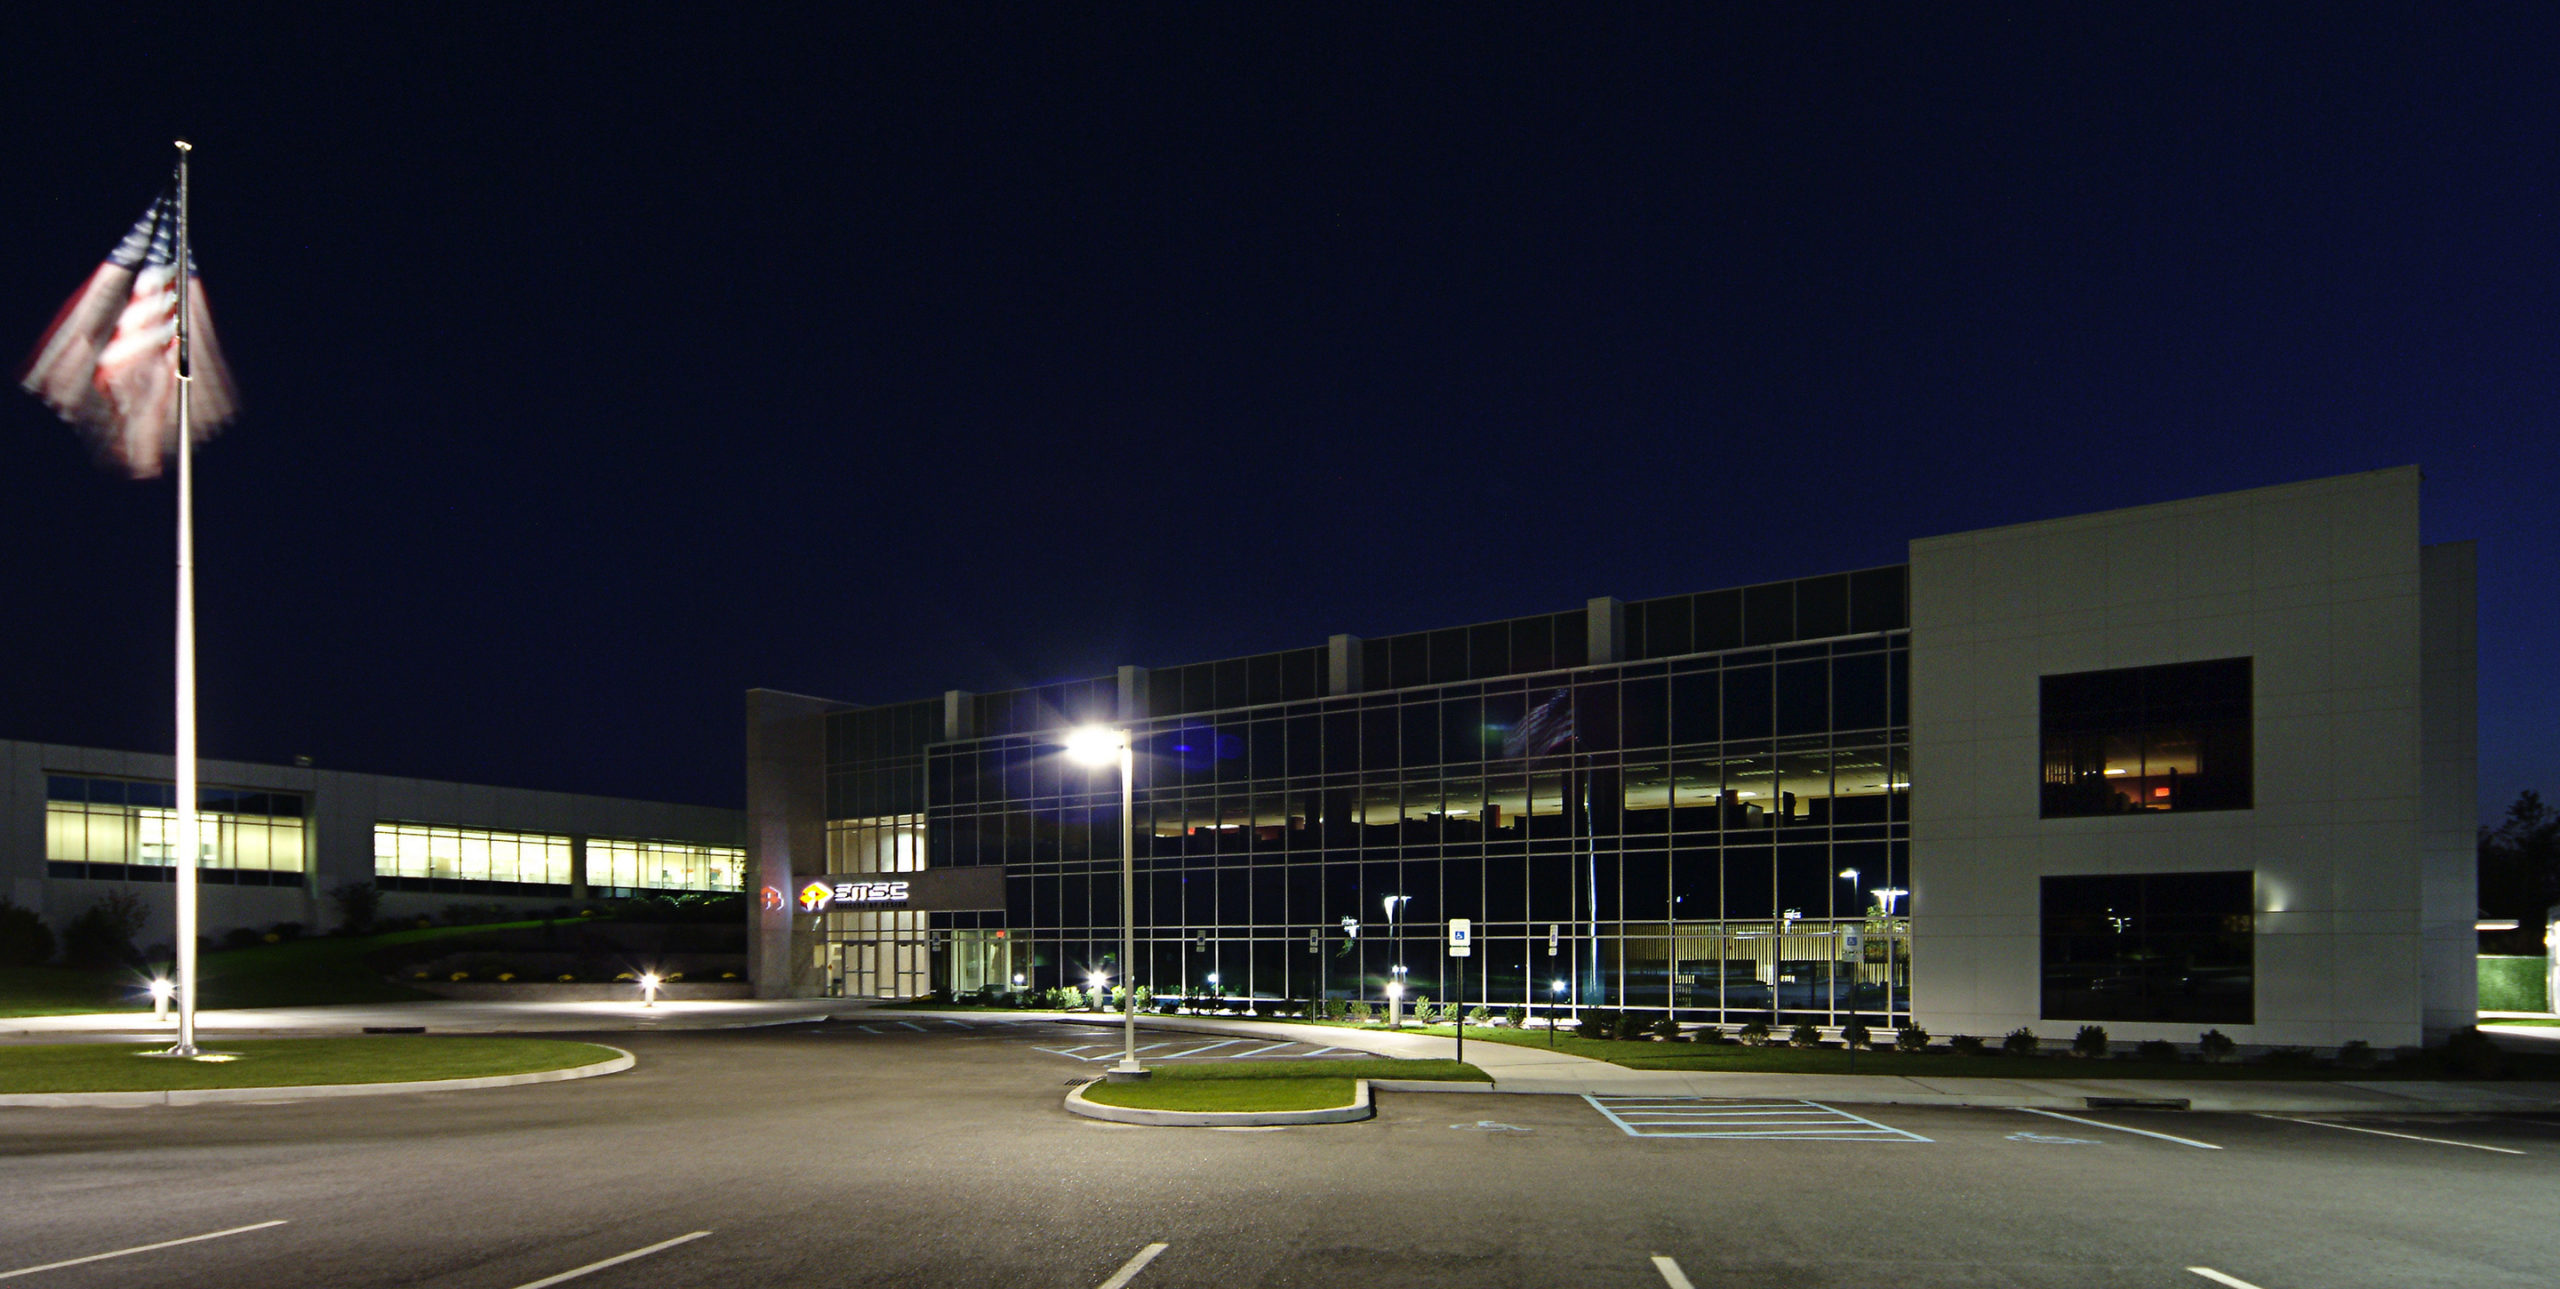 Back exterior of SMSC in Hauppauge